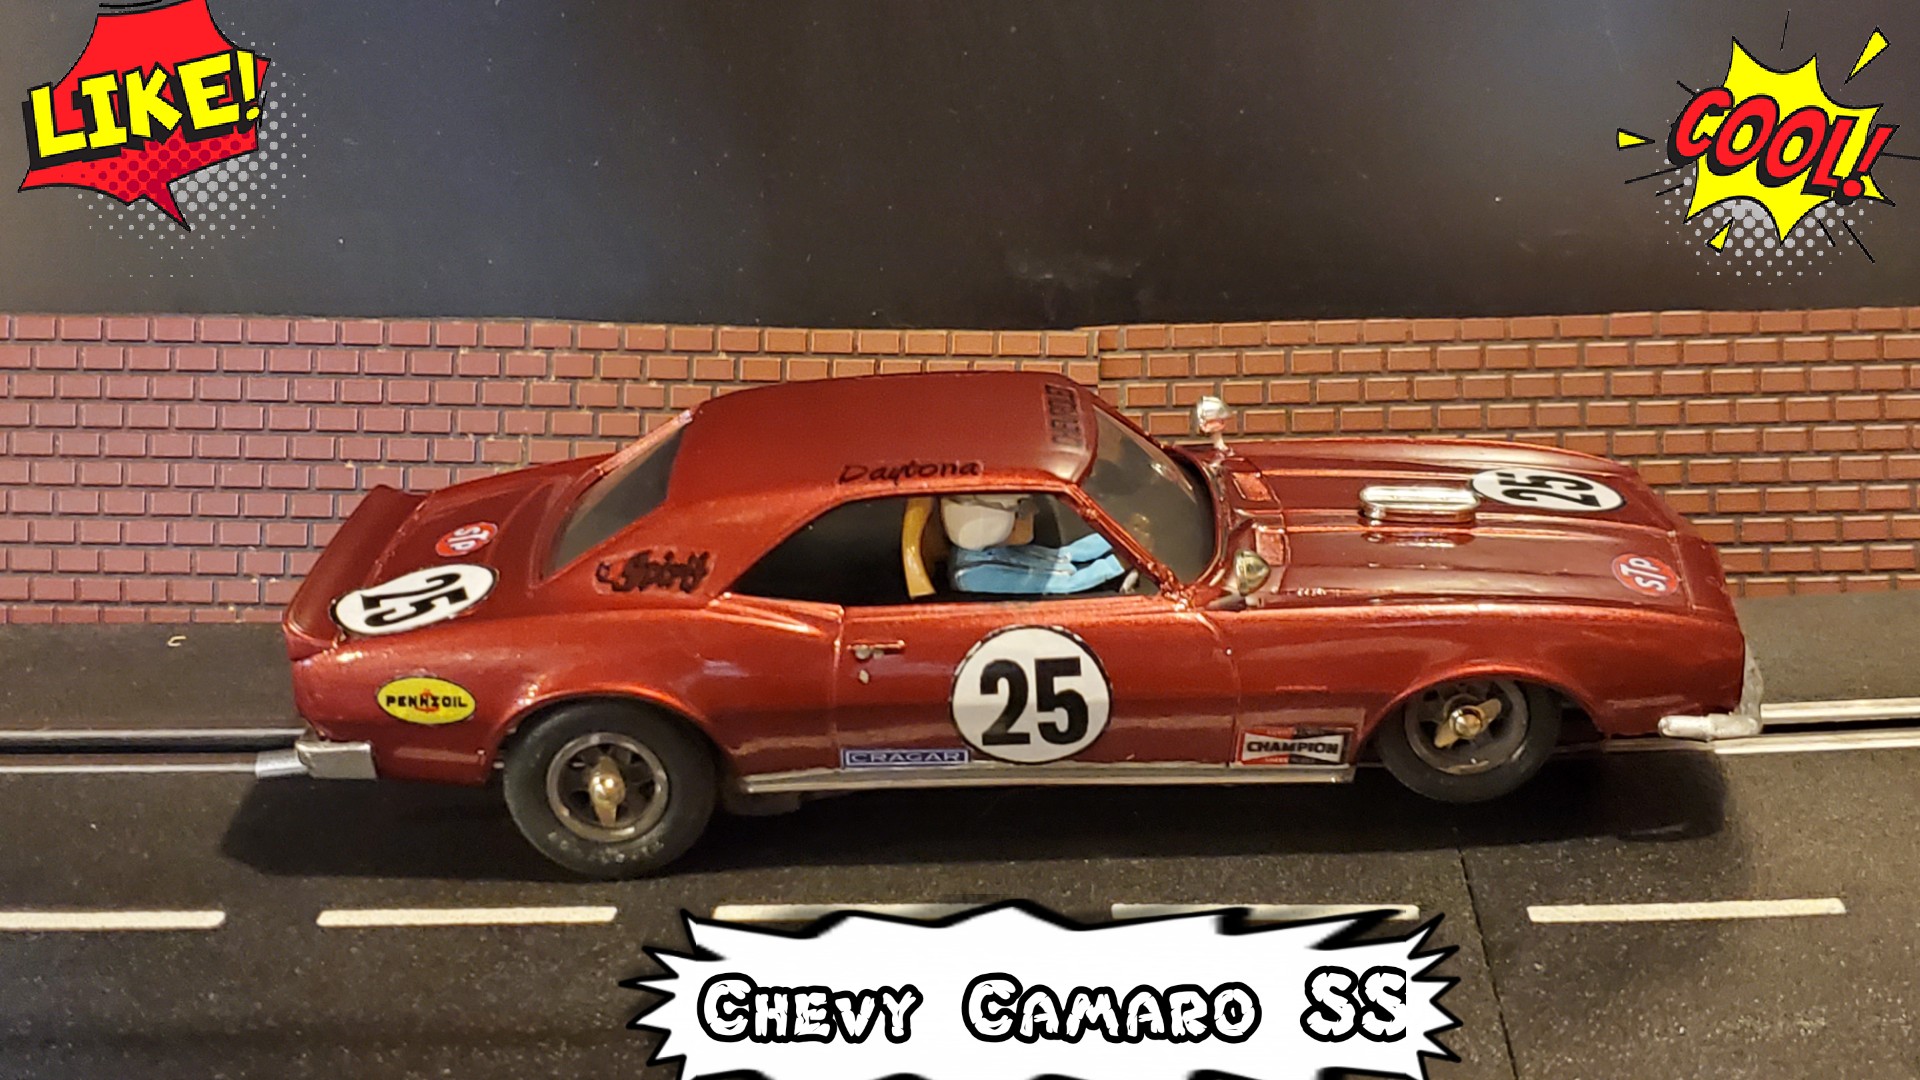 *SAVE $50 vs. our eBay store * COX Chevy Camaro SS 1:24 Scale Slot Car 25